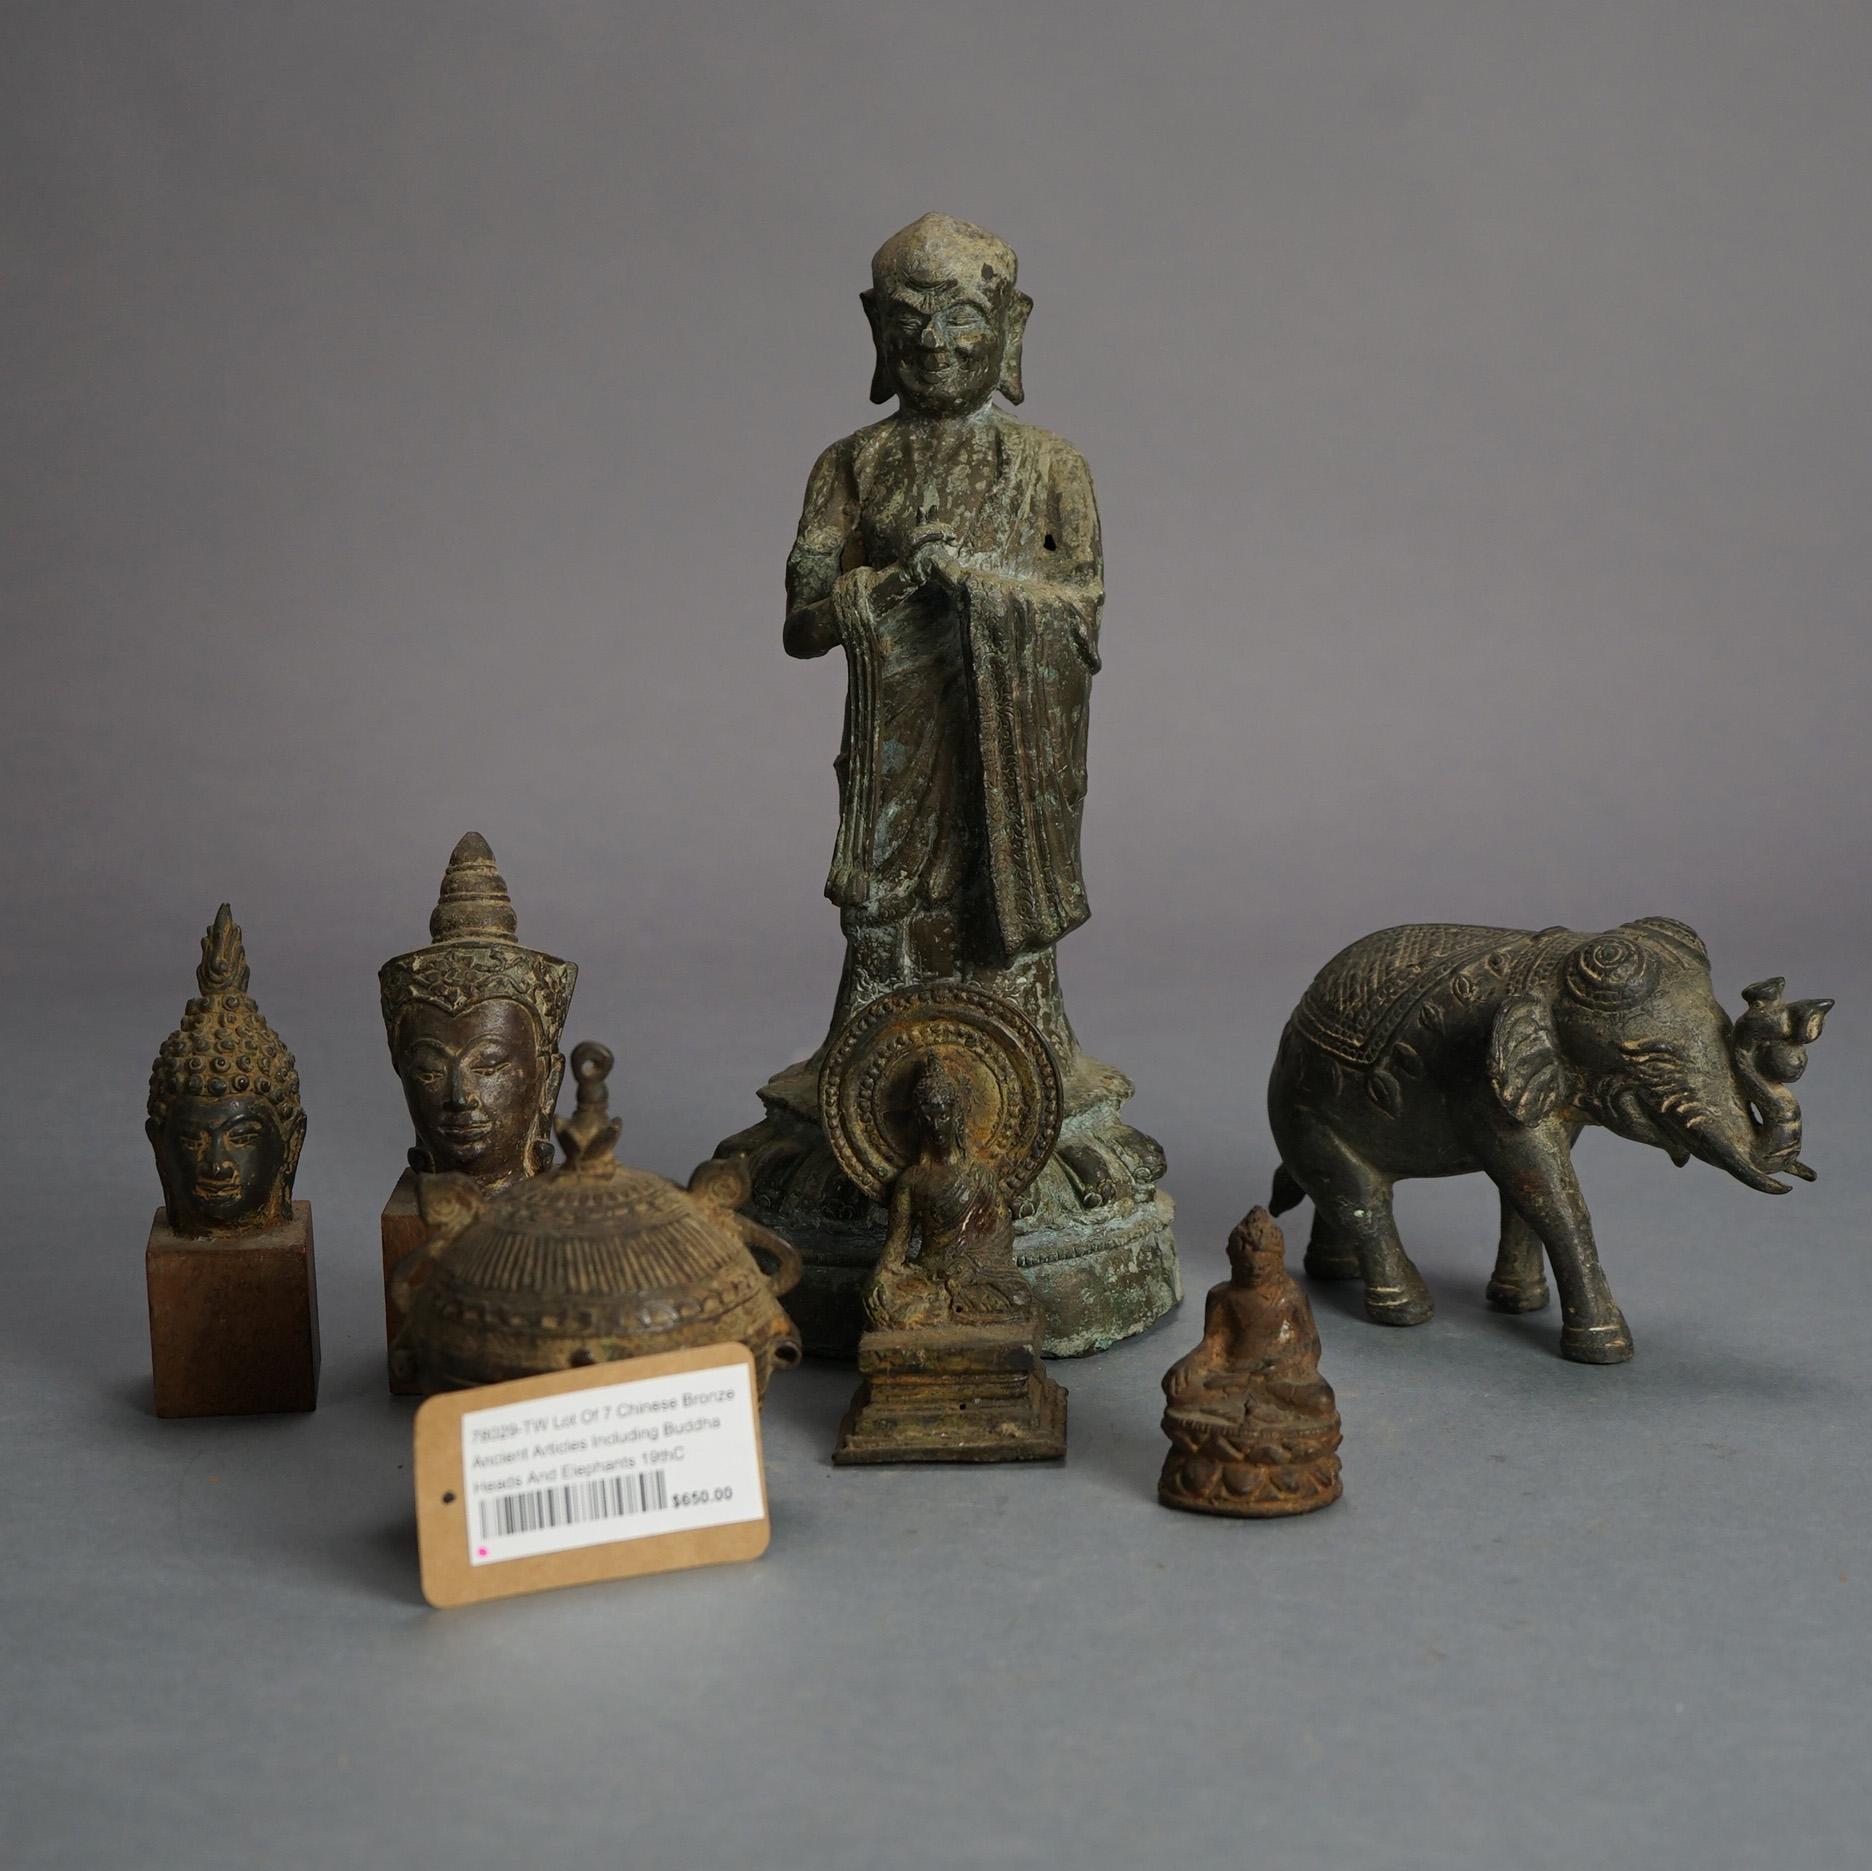 Seven Chinese Cast Bronze Ancient Articles Including Buddha Heads and Elephants 19thC

Measures - 10.5